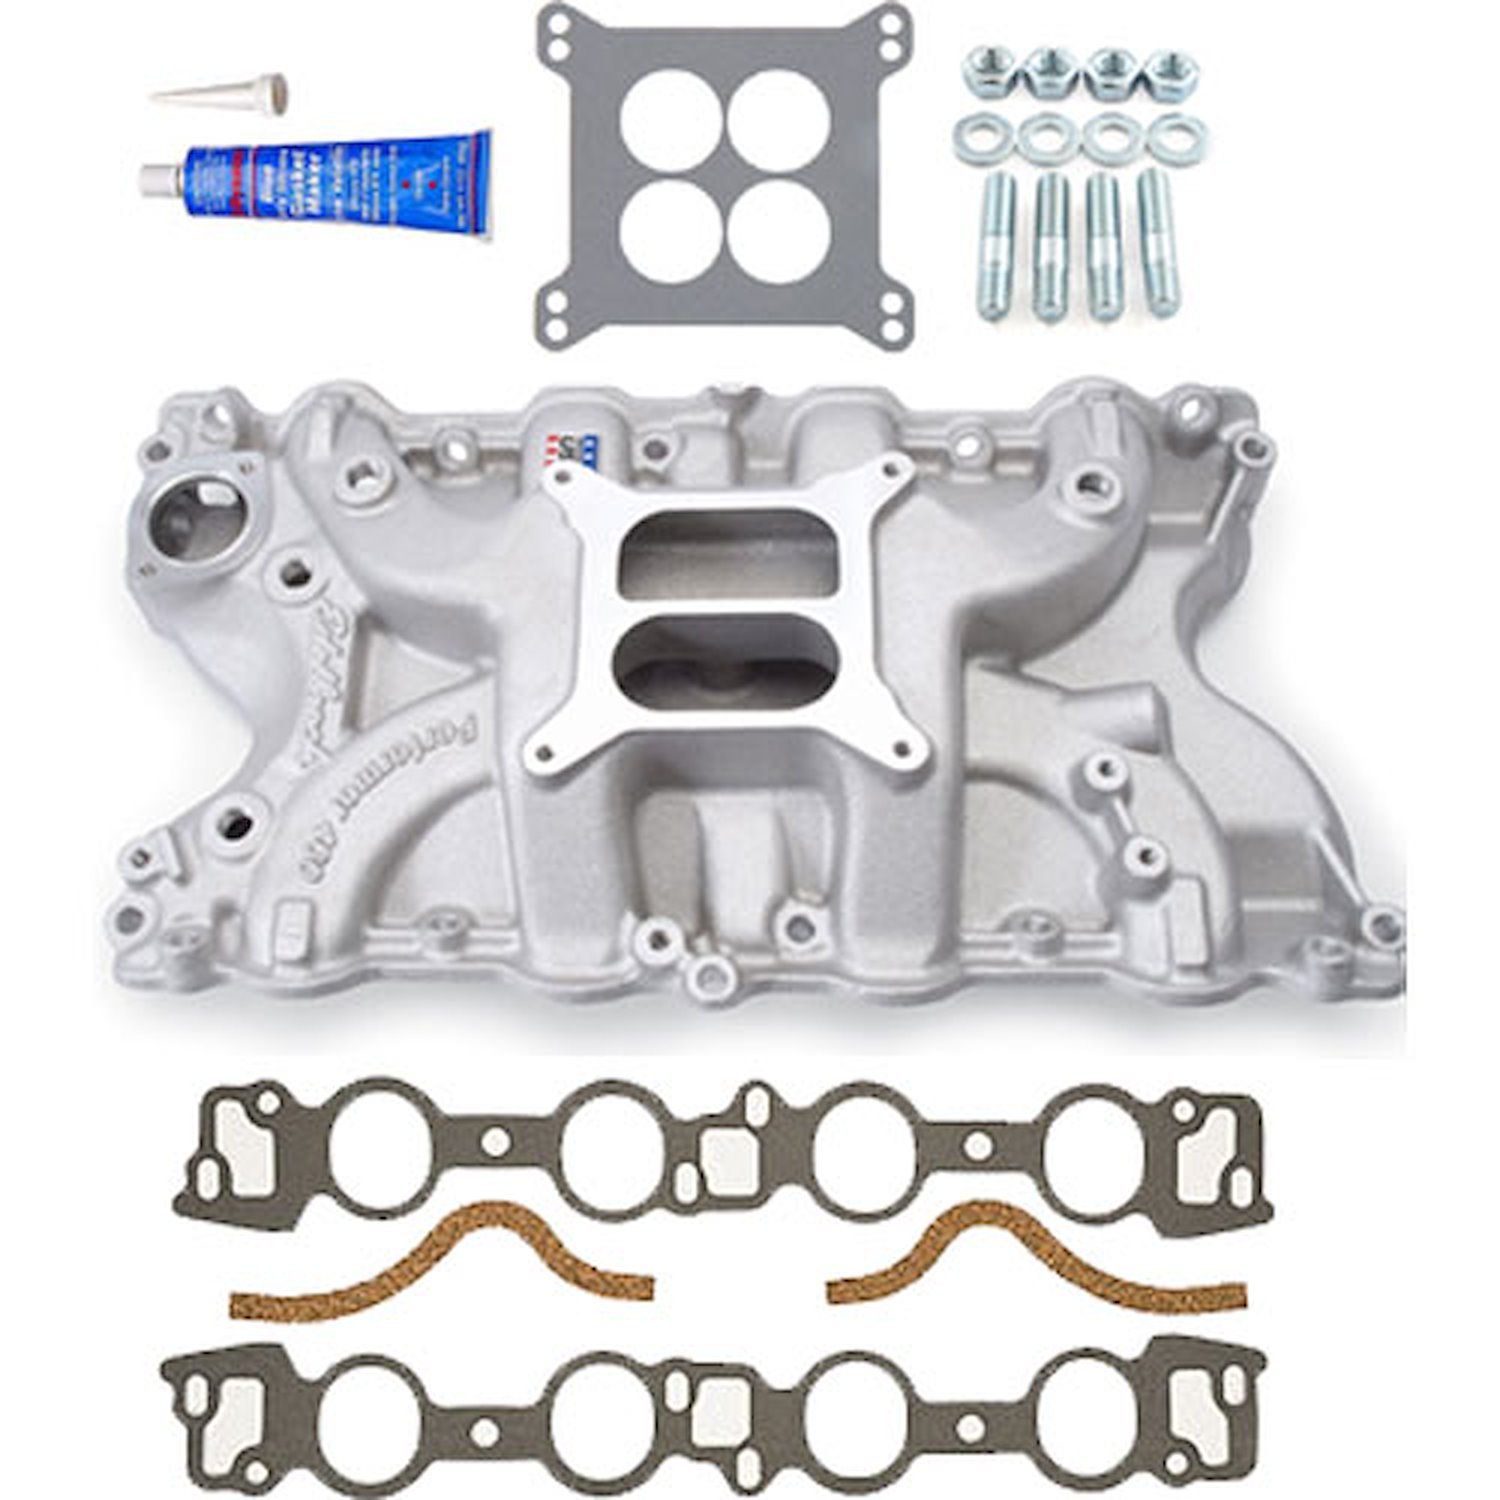 Performer 460 Ford Intake Manifold with Installation Kit